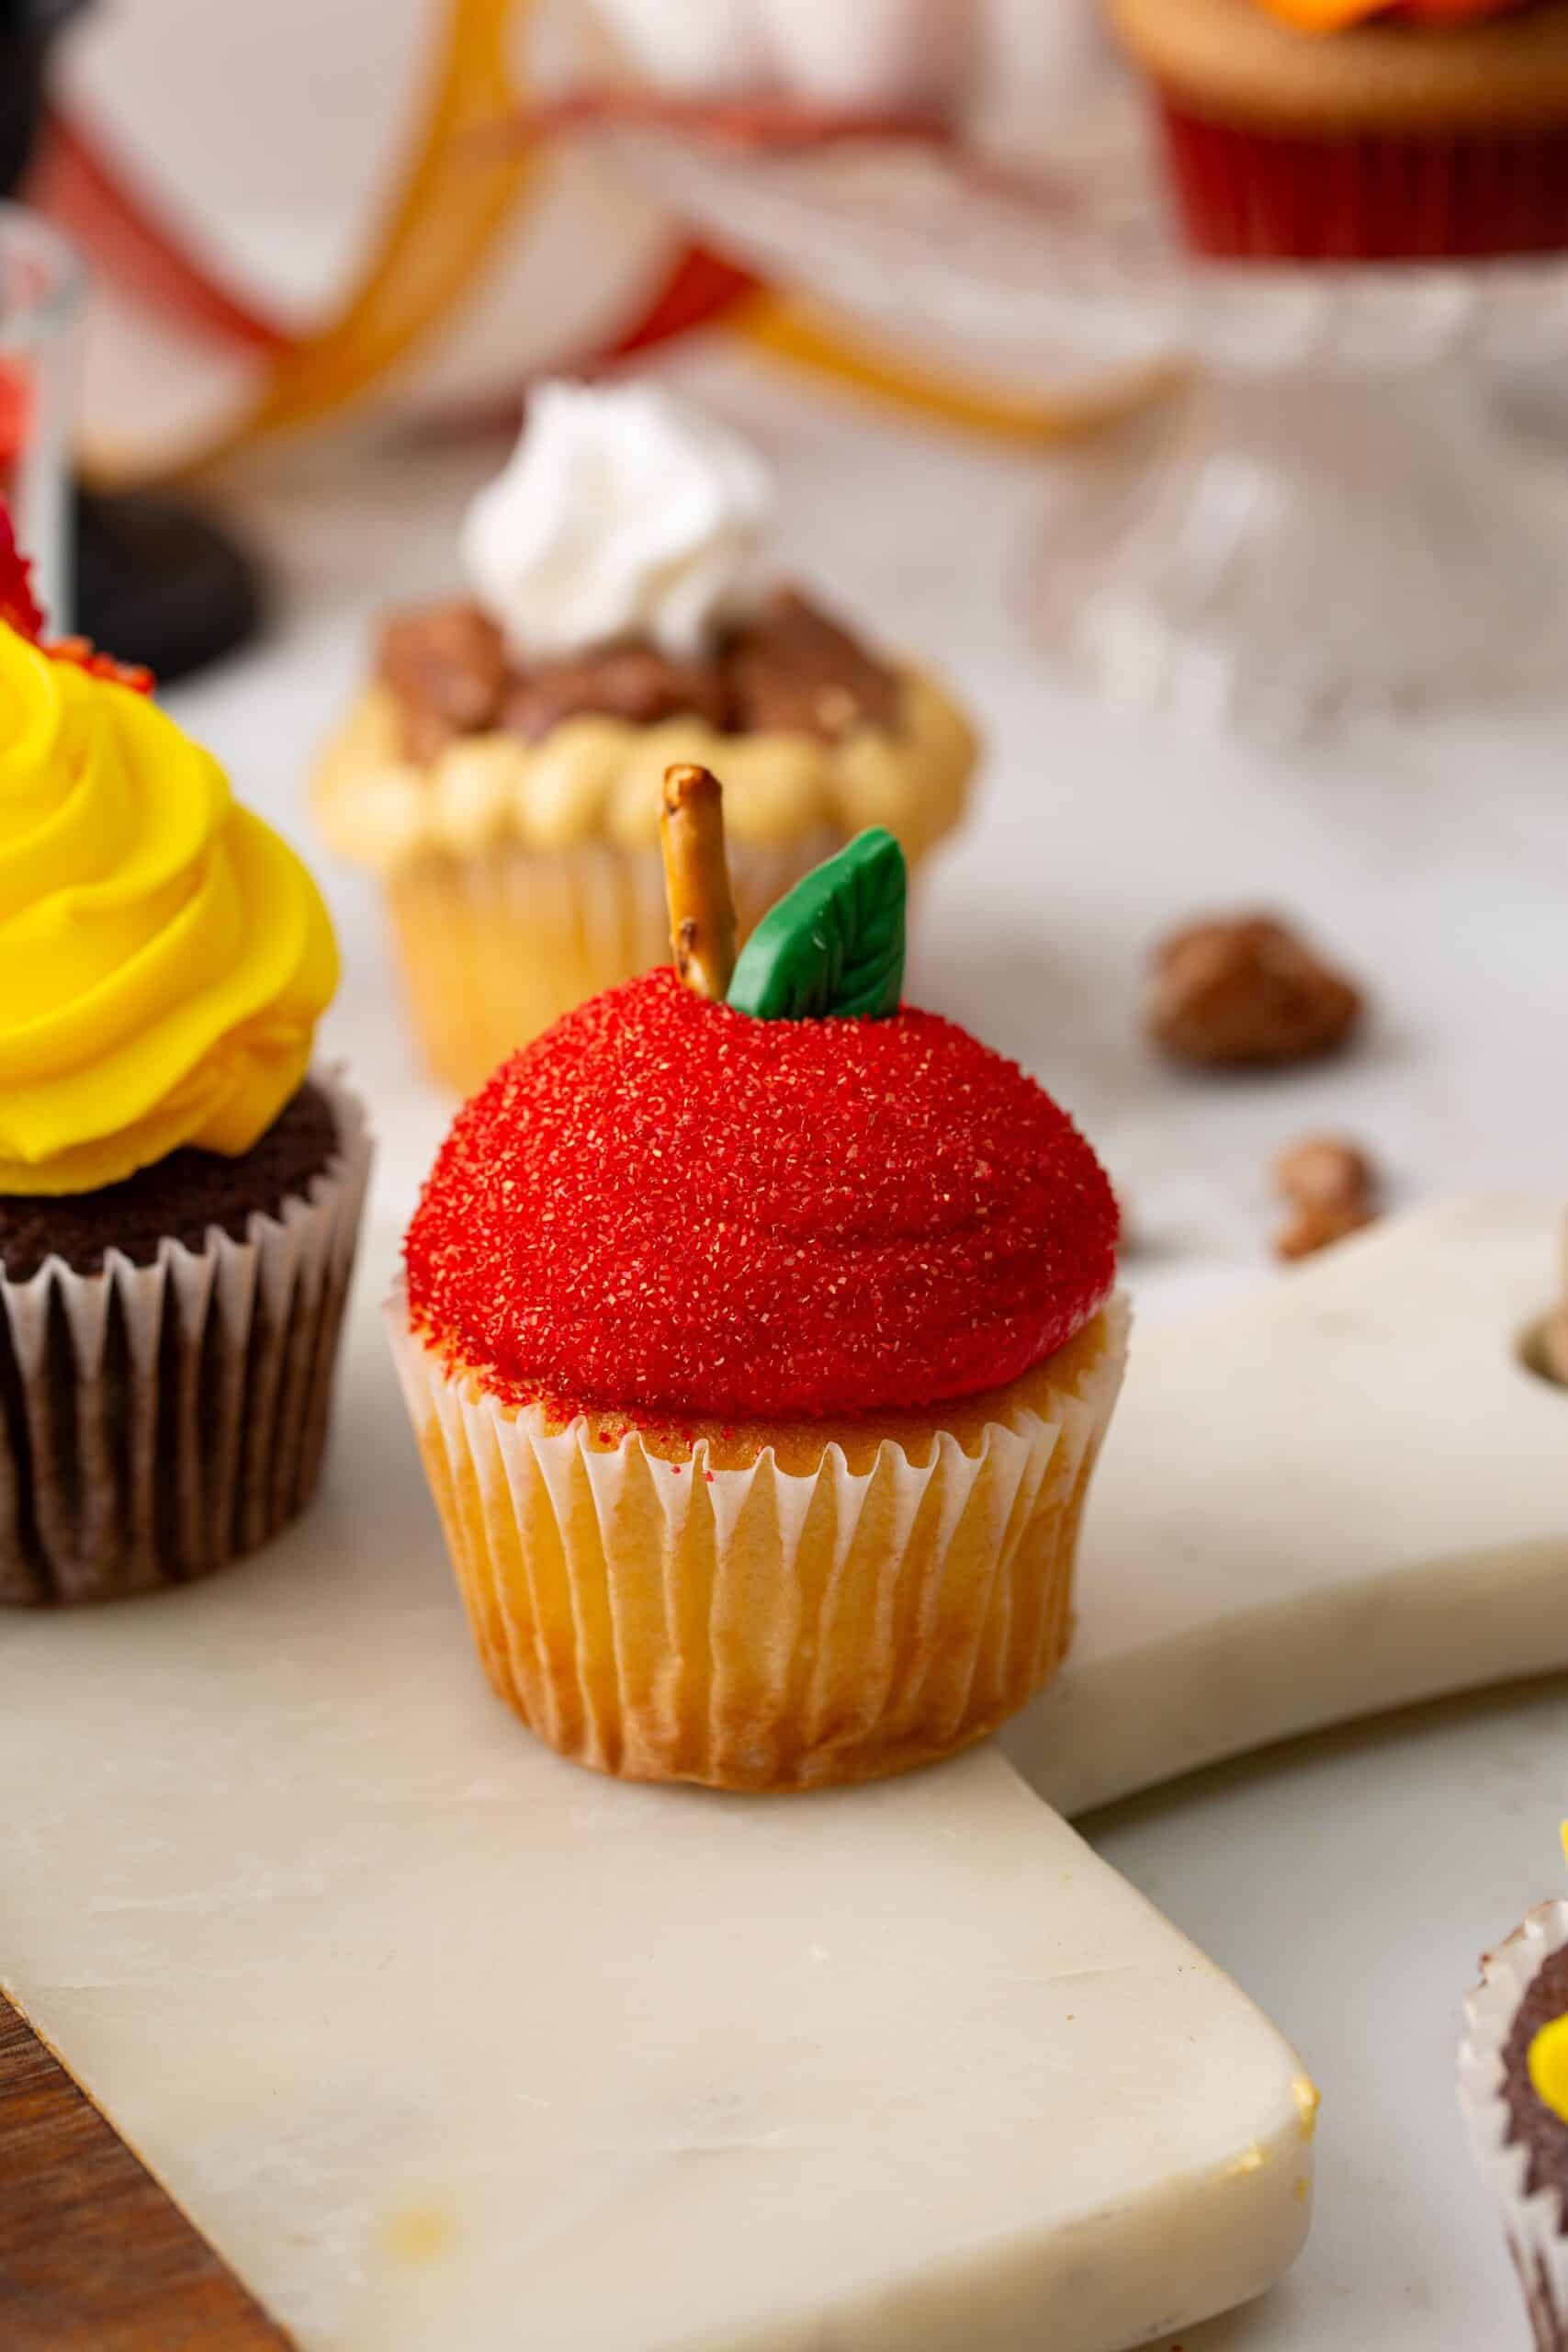 how to make cupcakes decorated like apples